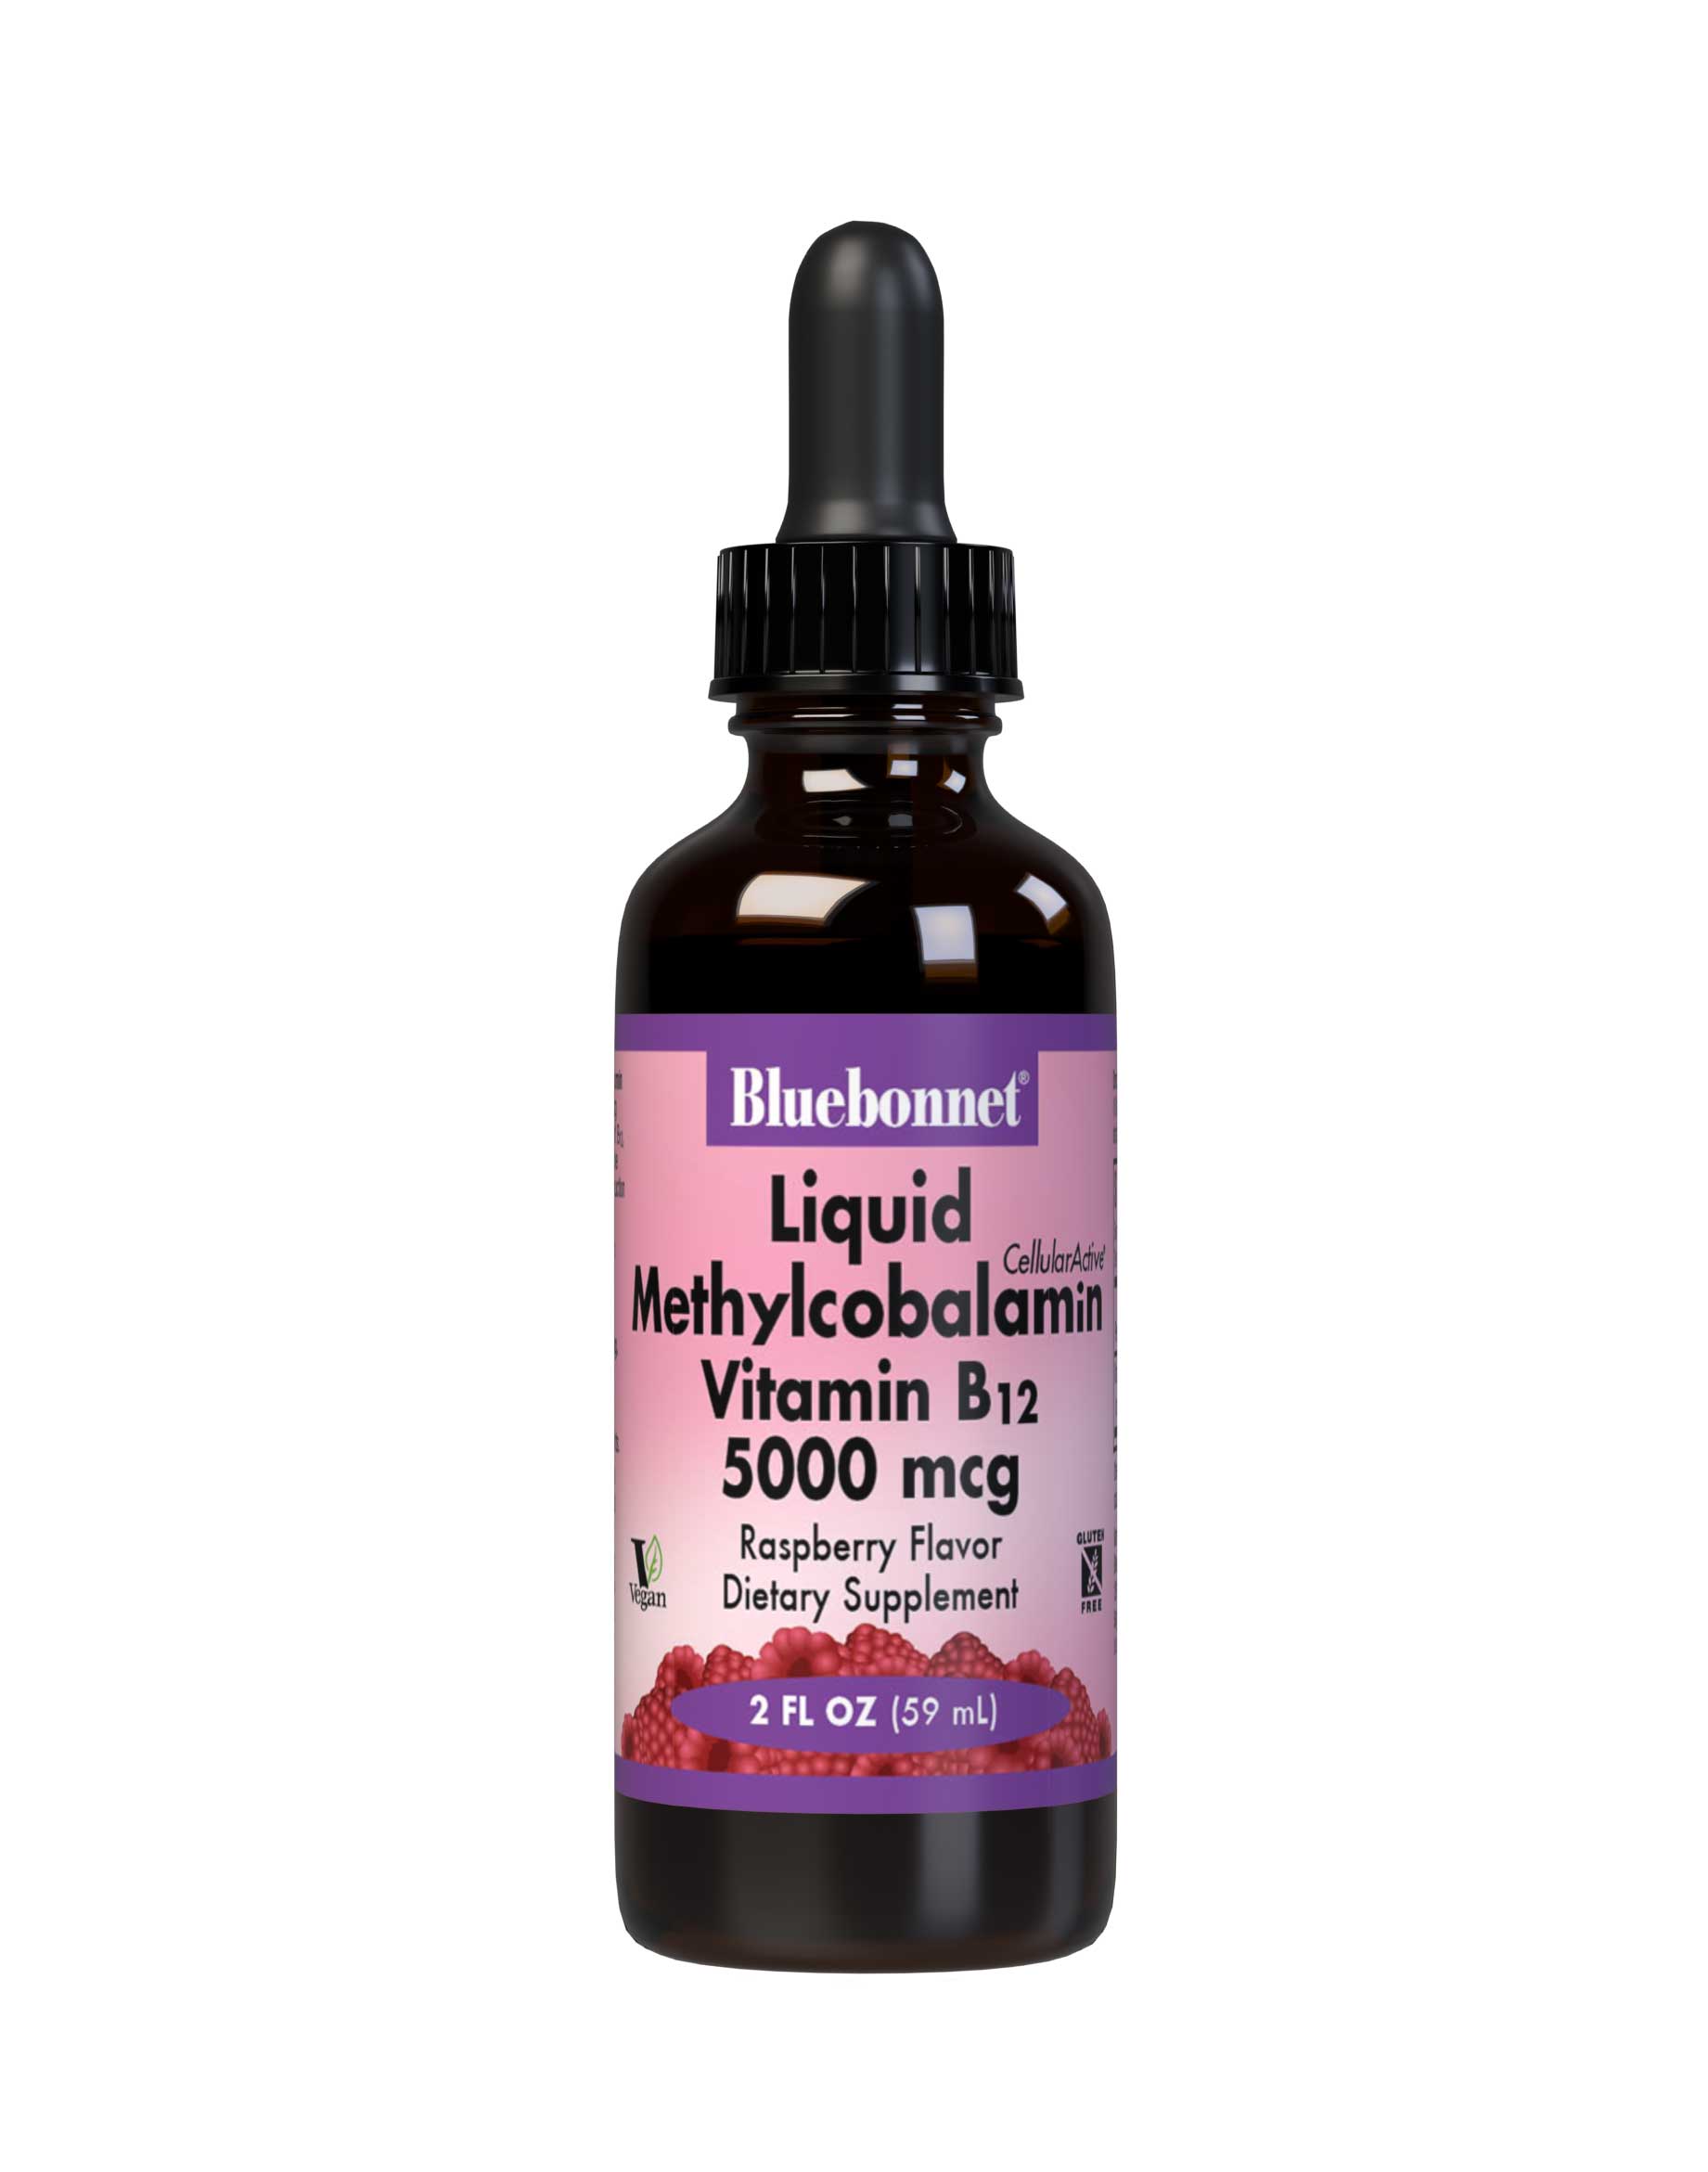 Bluebonnet’s Liquid CellularActive Methylcobalamin Vitamin B12 5000 mcg is formulated with fast-acting vitamin B12 as methylcobalamin, a coenzyme form of B12, which may be better utilized and better retained in the body. Vitamin B12 supports cellular energy production and nervous system health. #size_2 fl oz